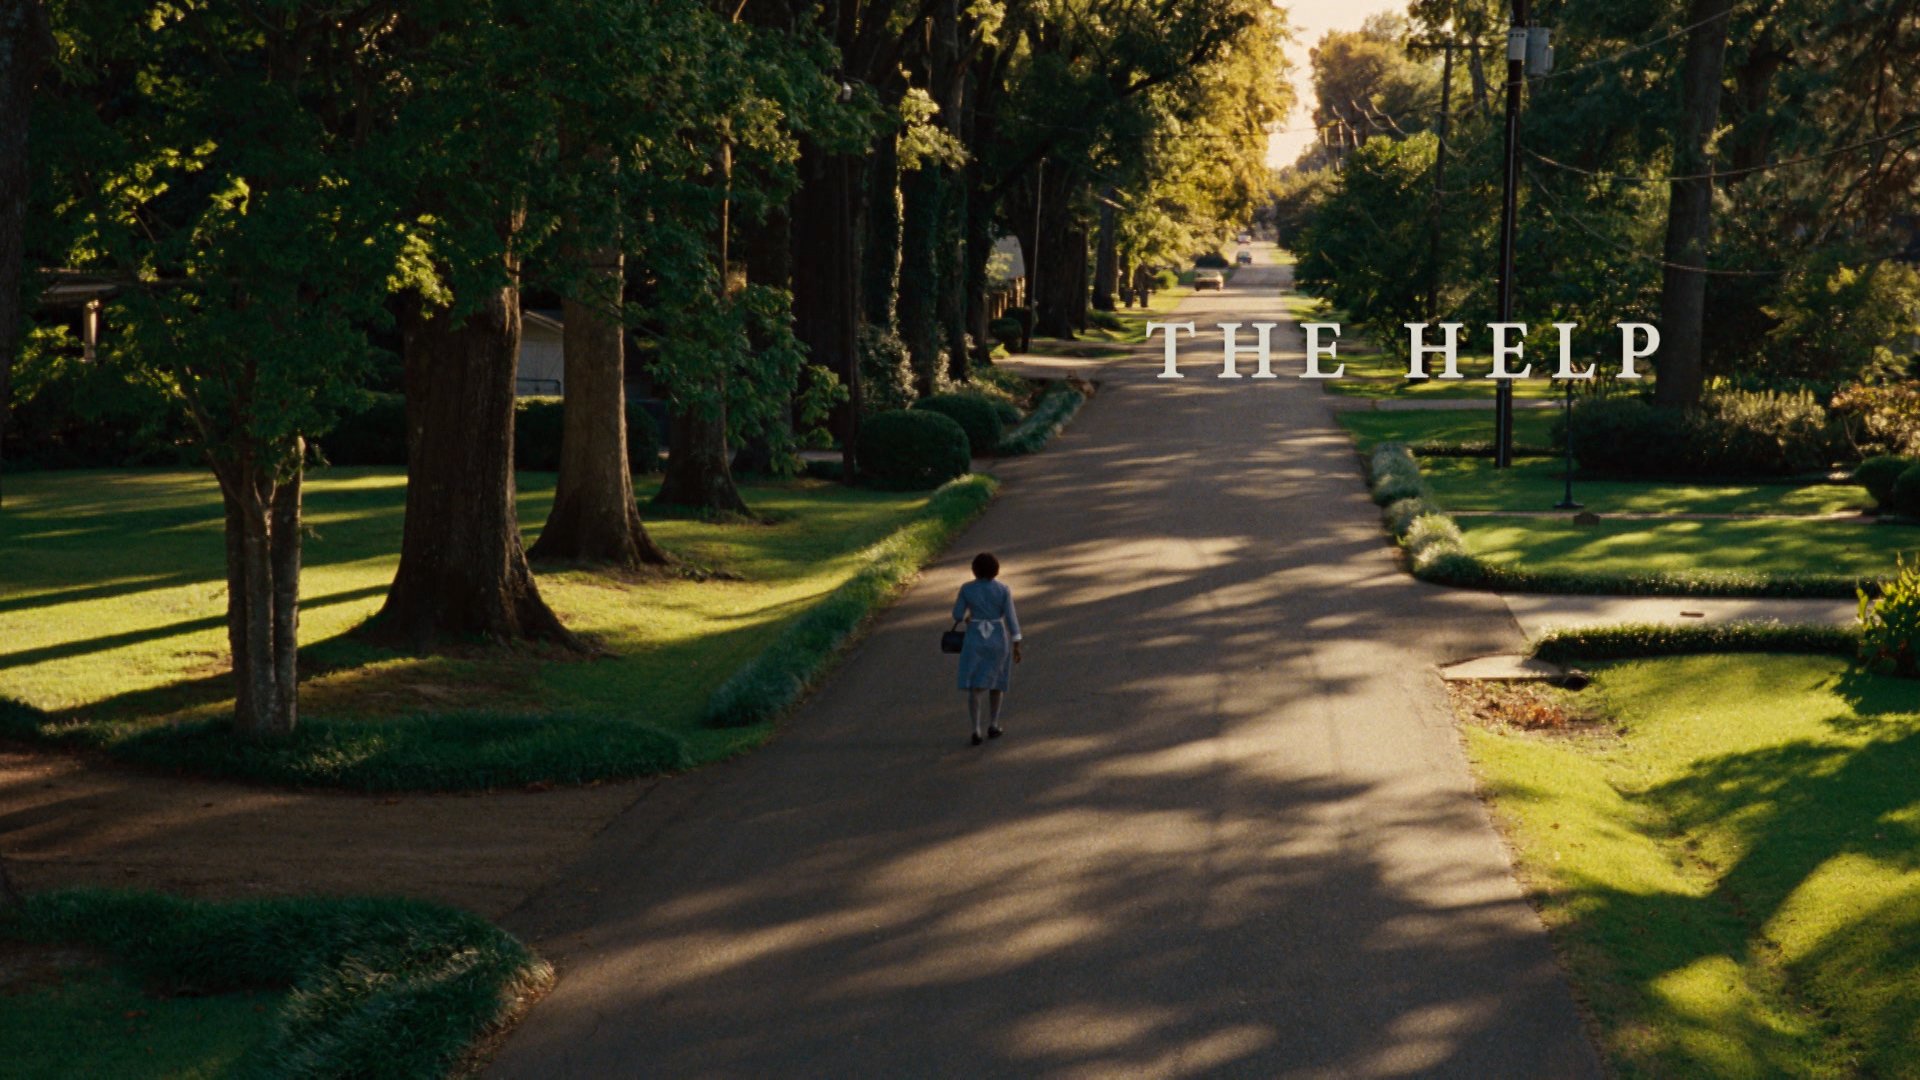 Watch The Help live or ondemand Freeview Australia